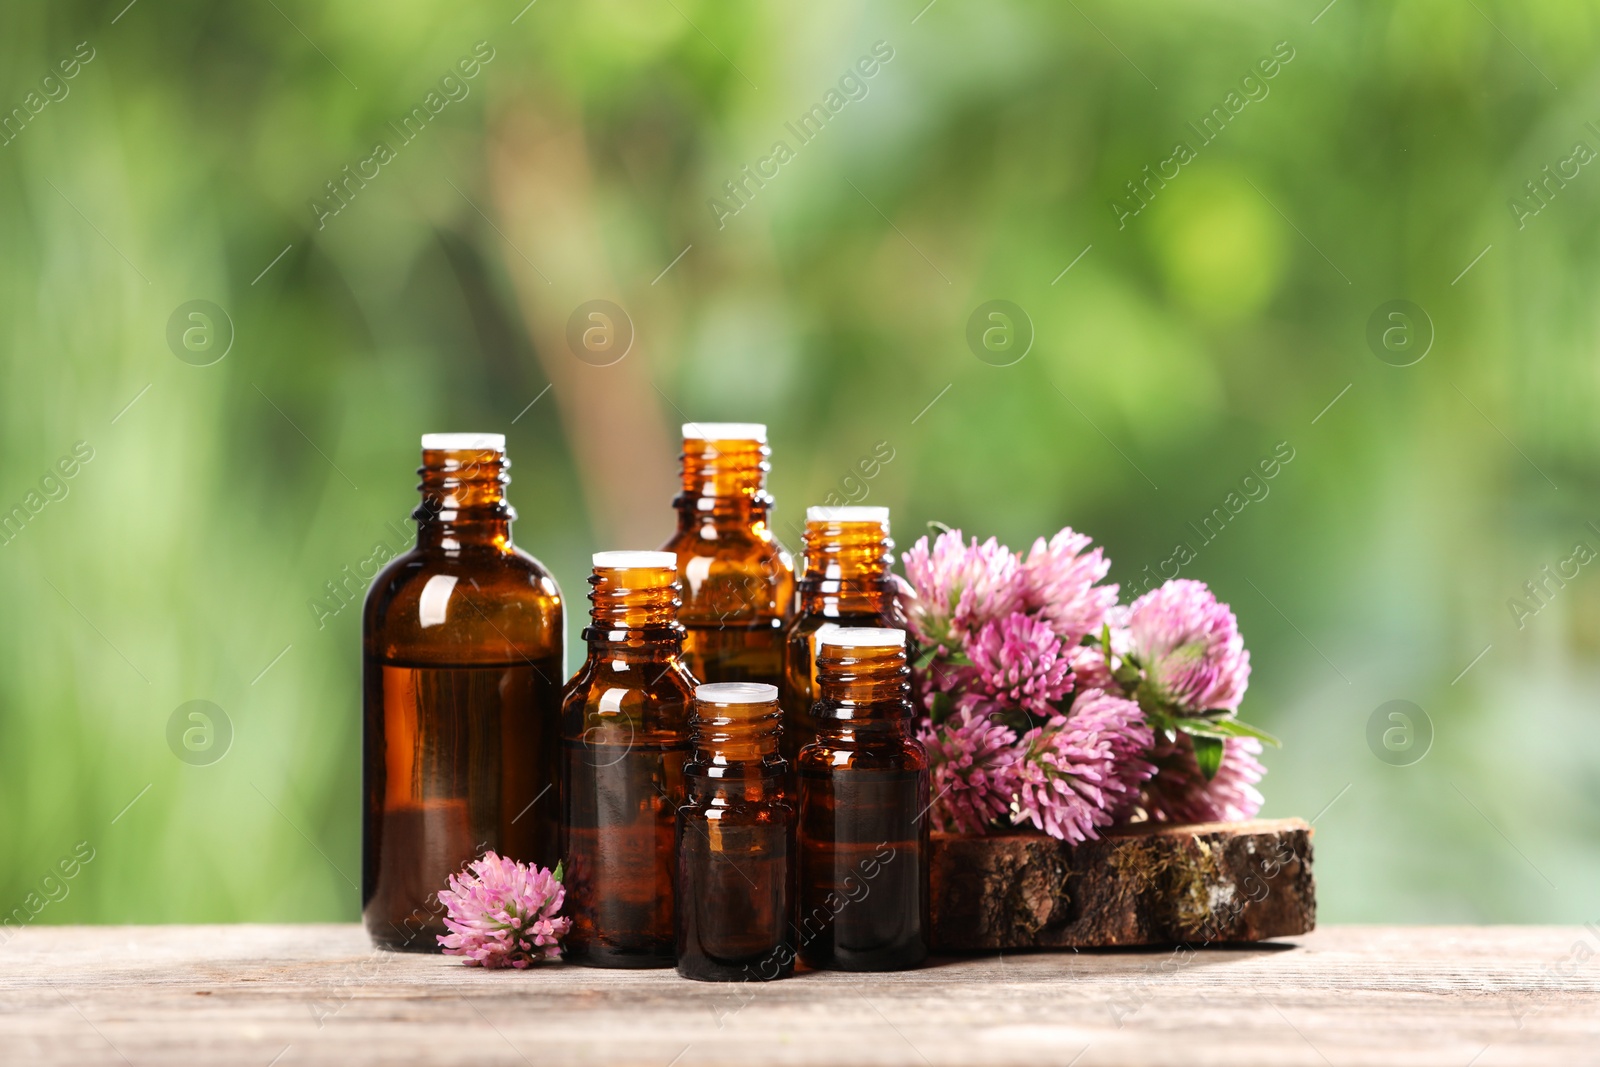 Photo of Bottles with essential oil and clover flowers on wooden table against blurred green background. Space for text